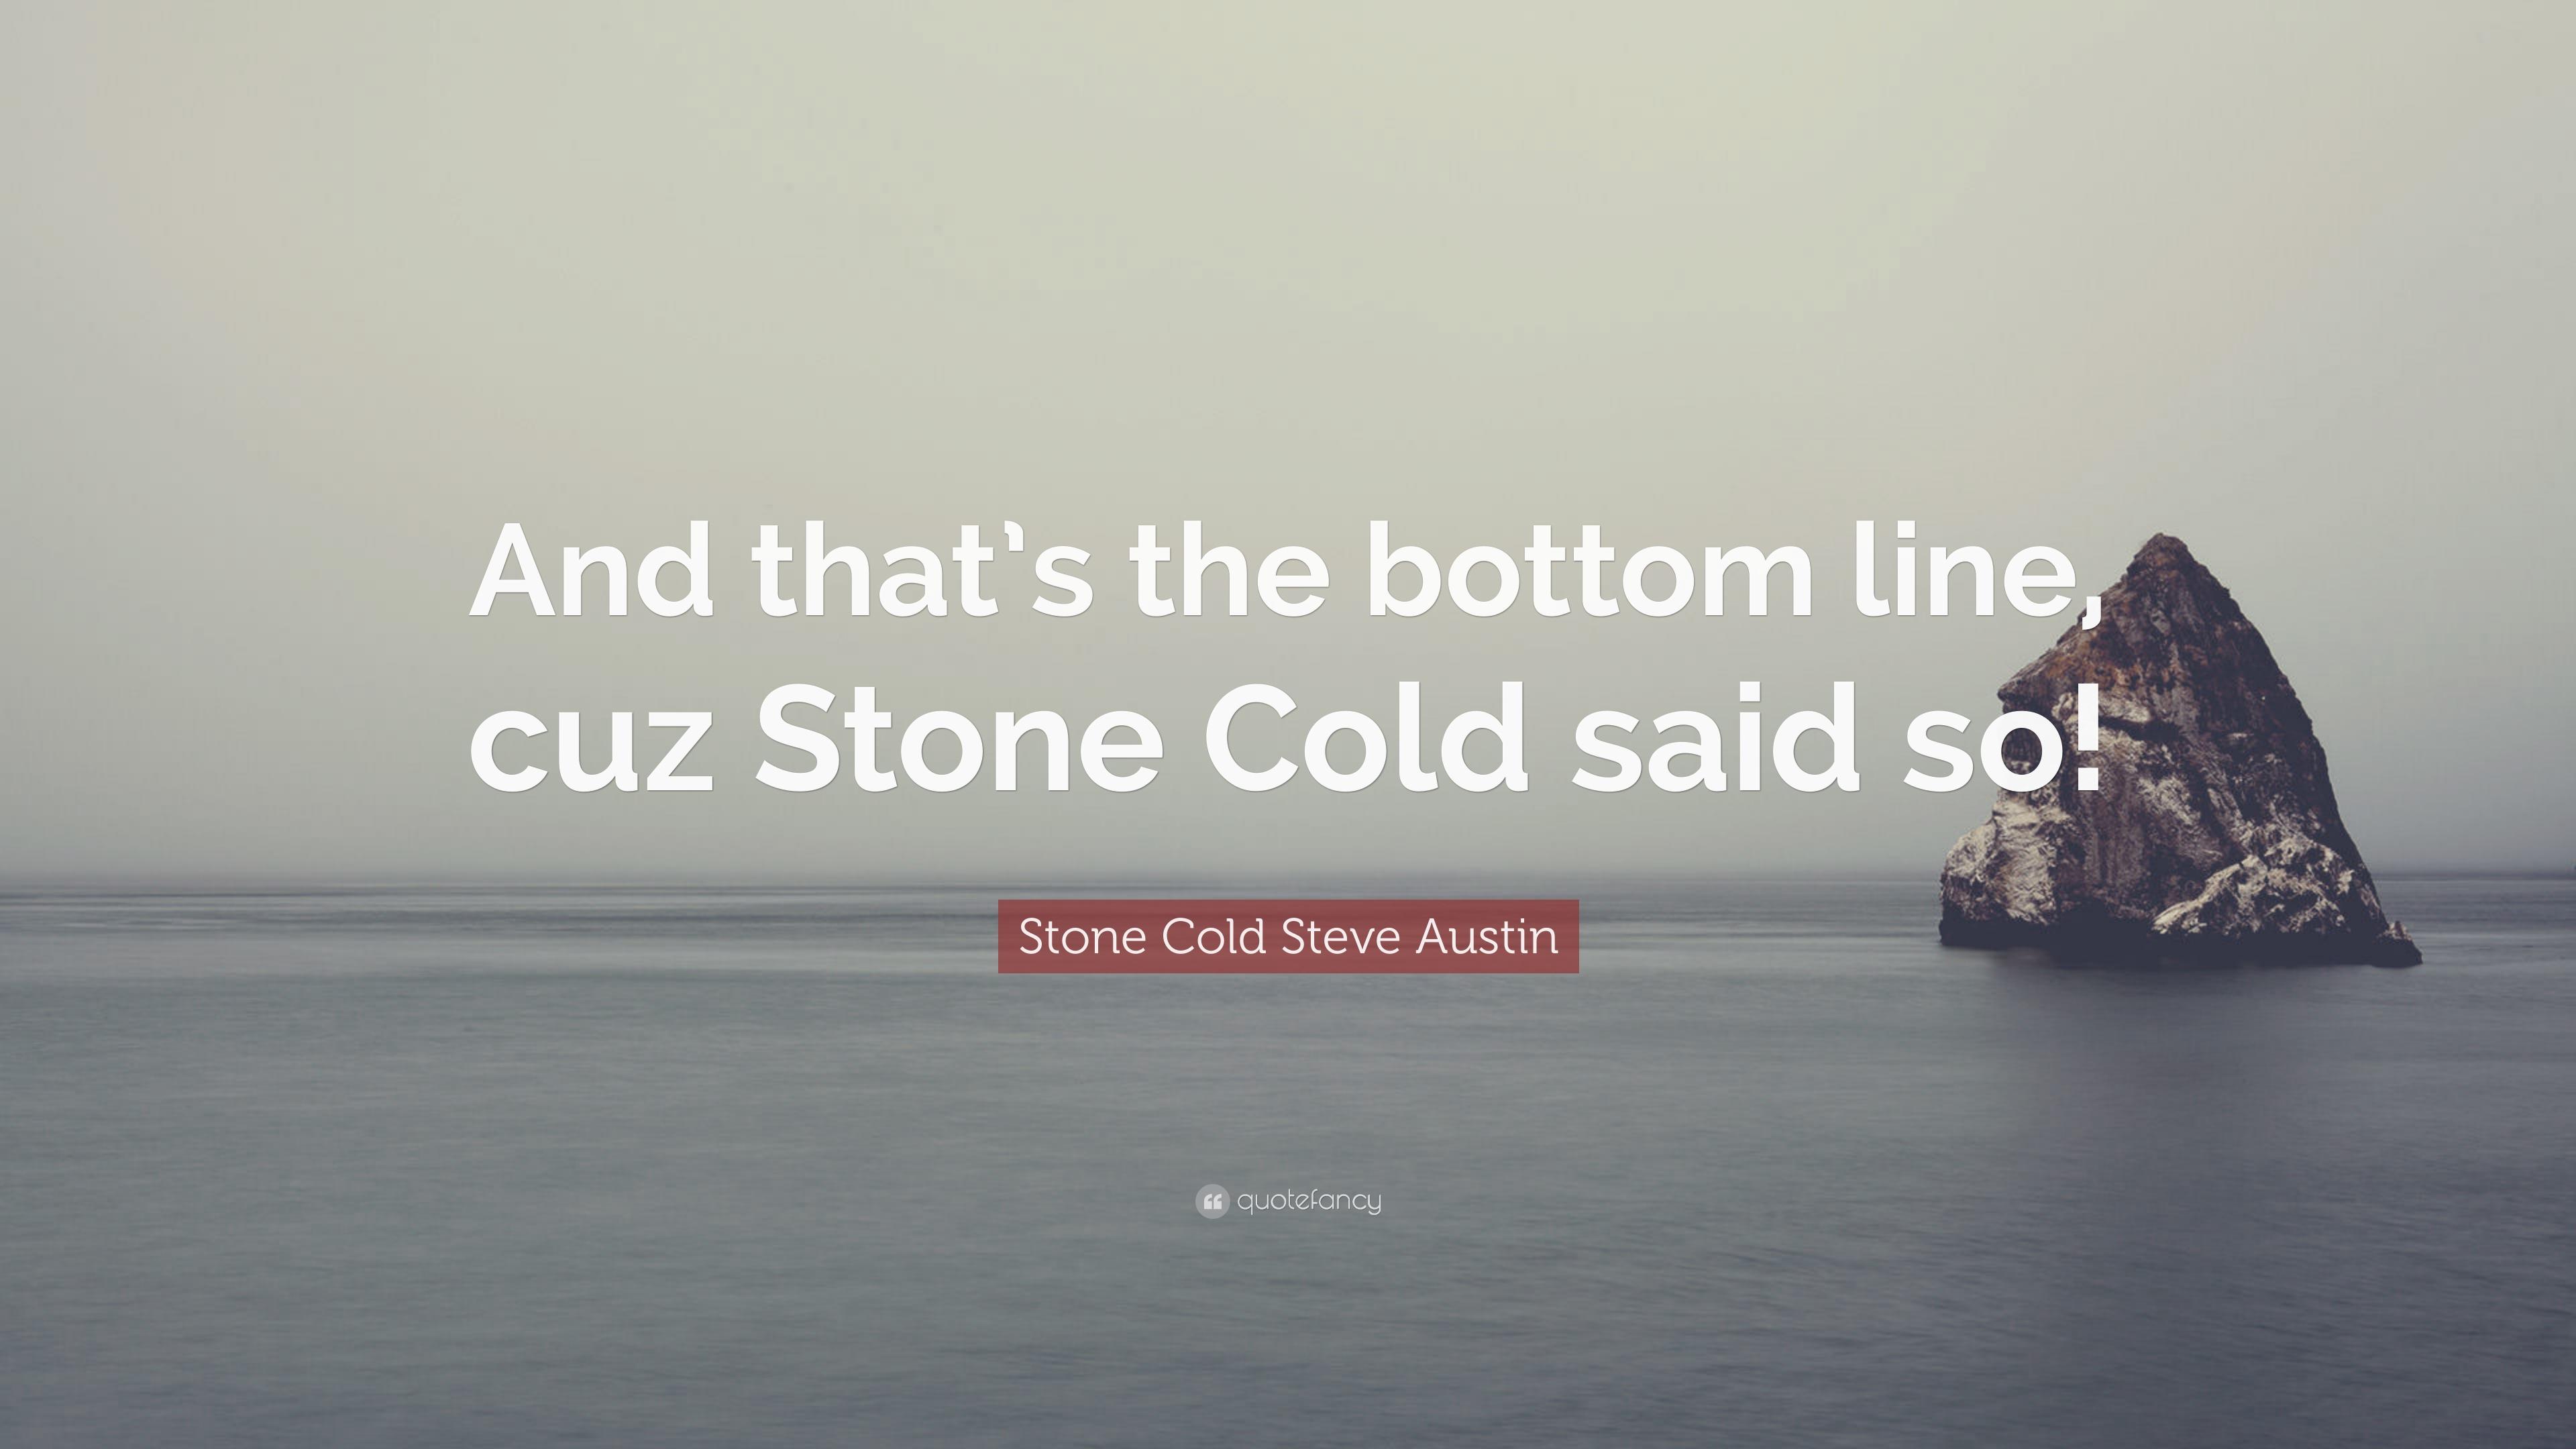 Stone Cold Steve Austin Quote: “And that's the bottom line, cuz